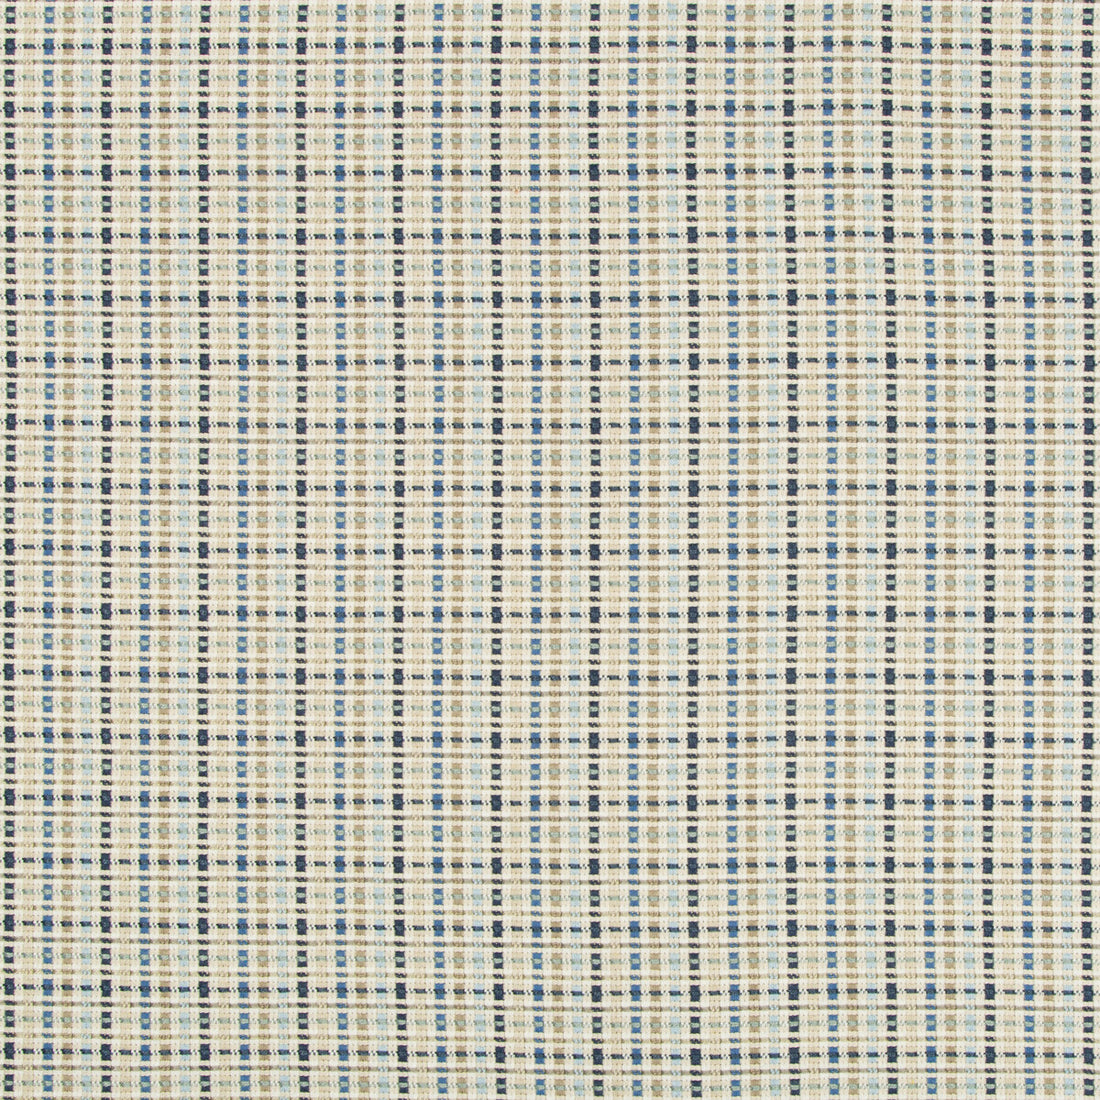 Marollen Texture fabric in blue/tan color - pattern 8019121.516.0 - by Brunschwig &amp; Fils in the Alsace Weaves collection